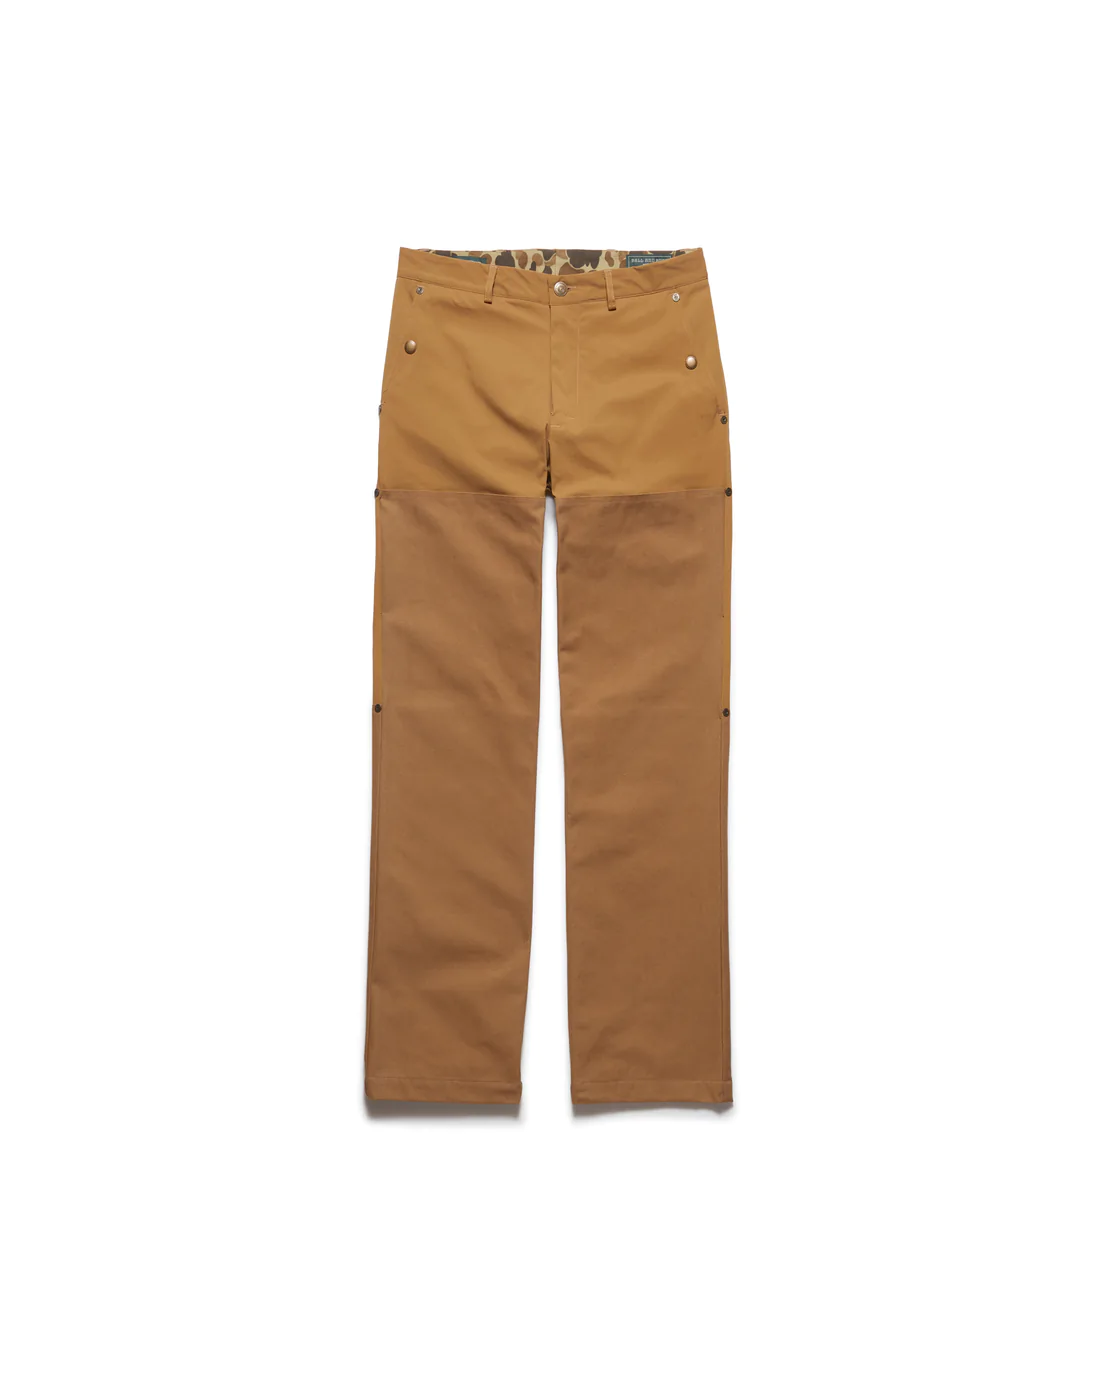 Active+ Field Pant - Rivers & Glen Trading Co.